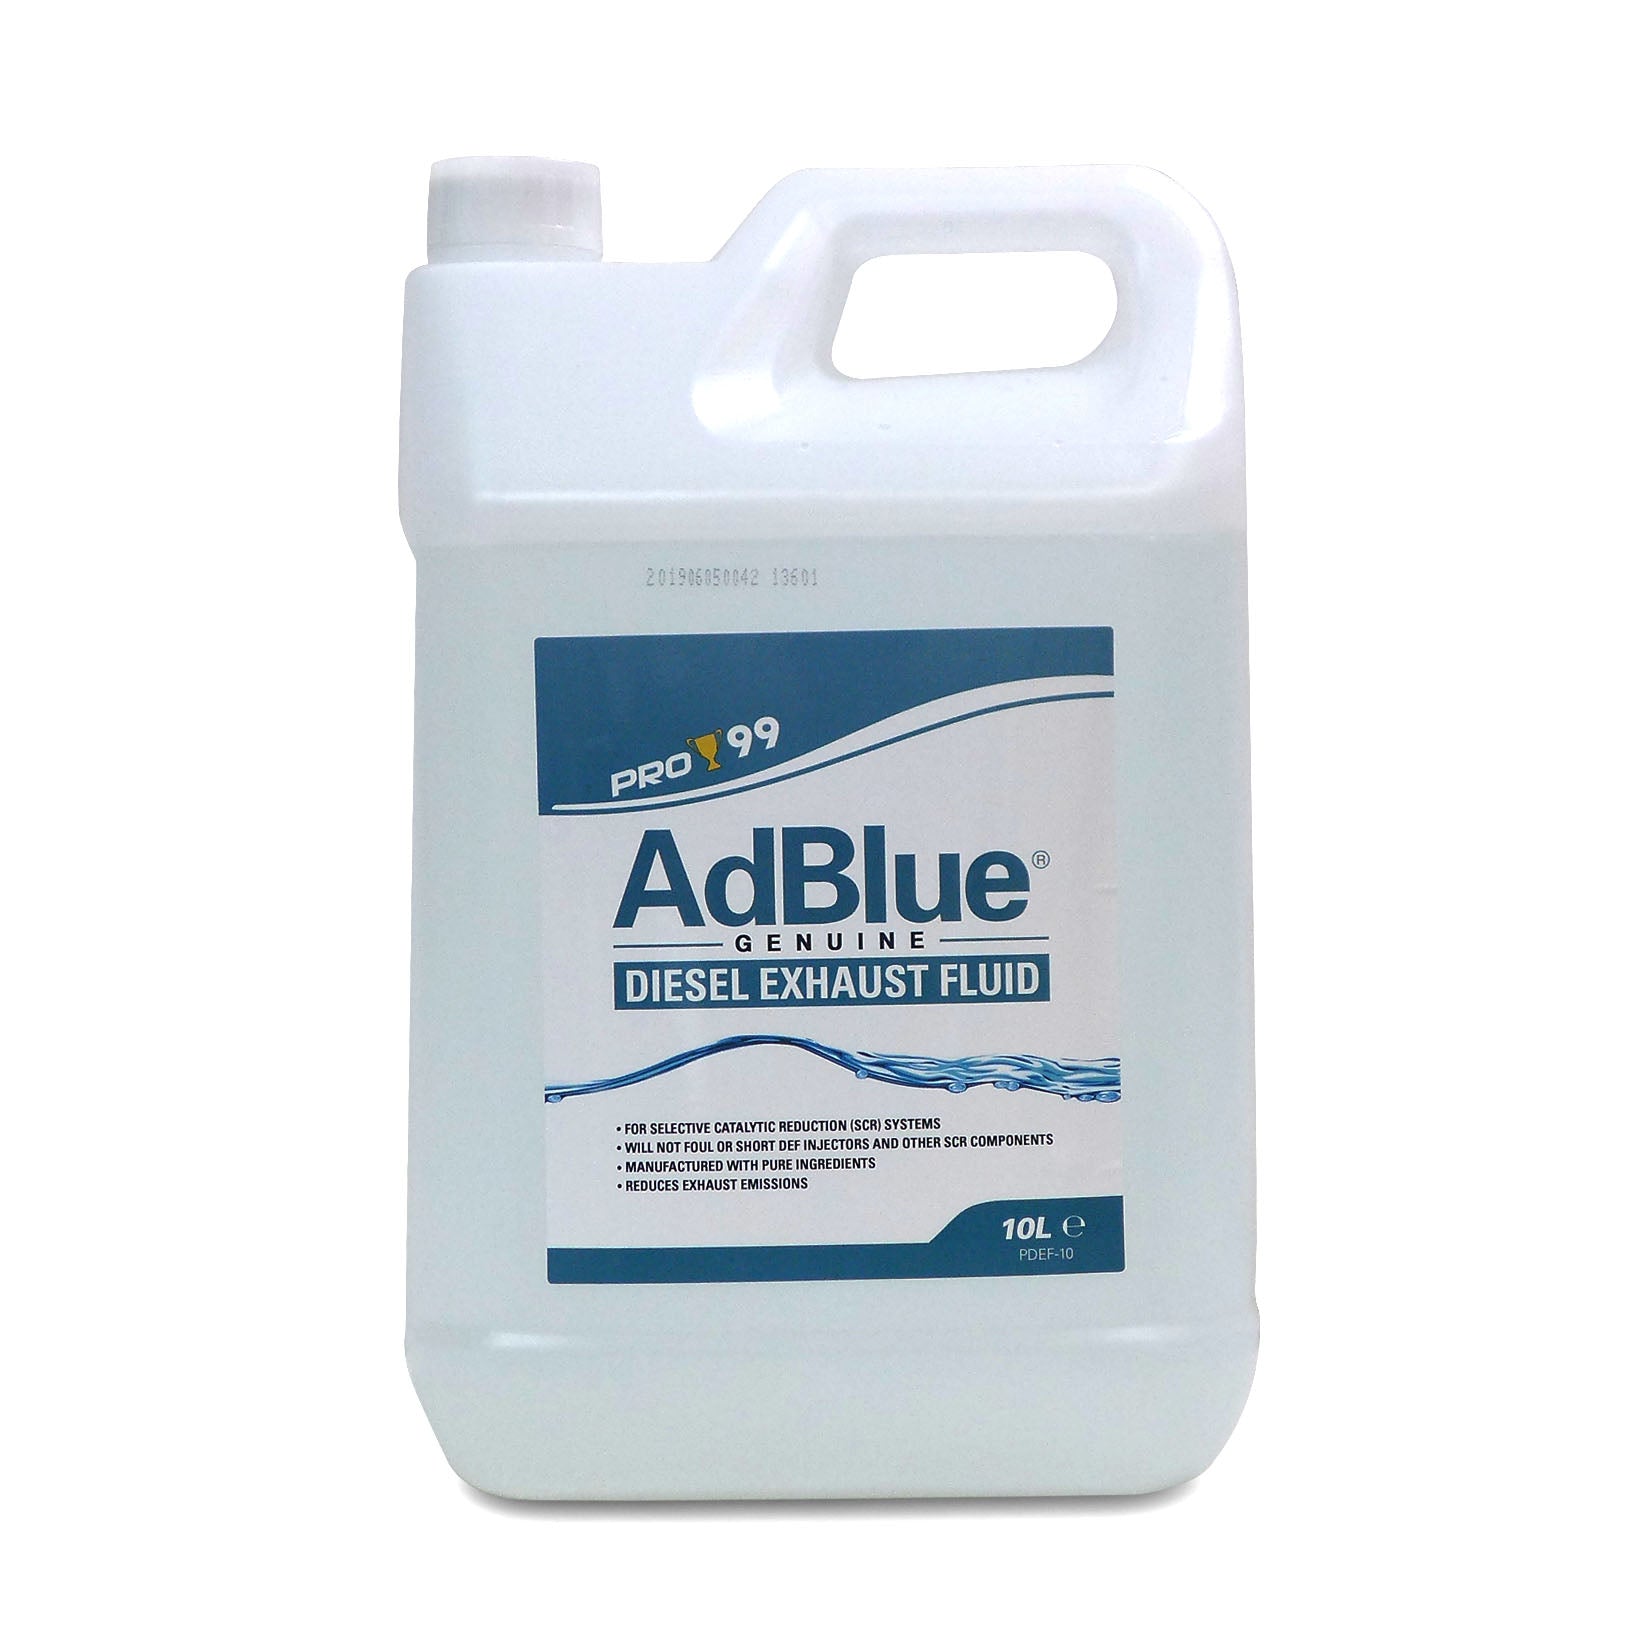 PRINZ - EVERYTHING YOU NEED TO KNOW ABOUT ADBLUE®.